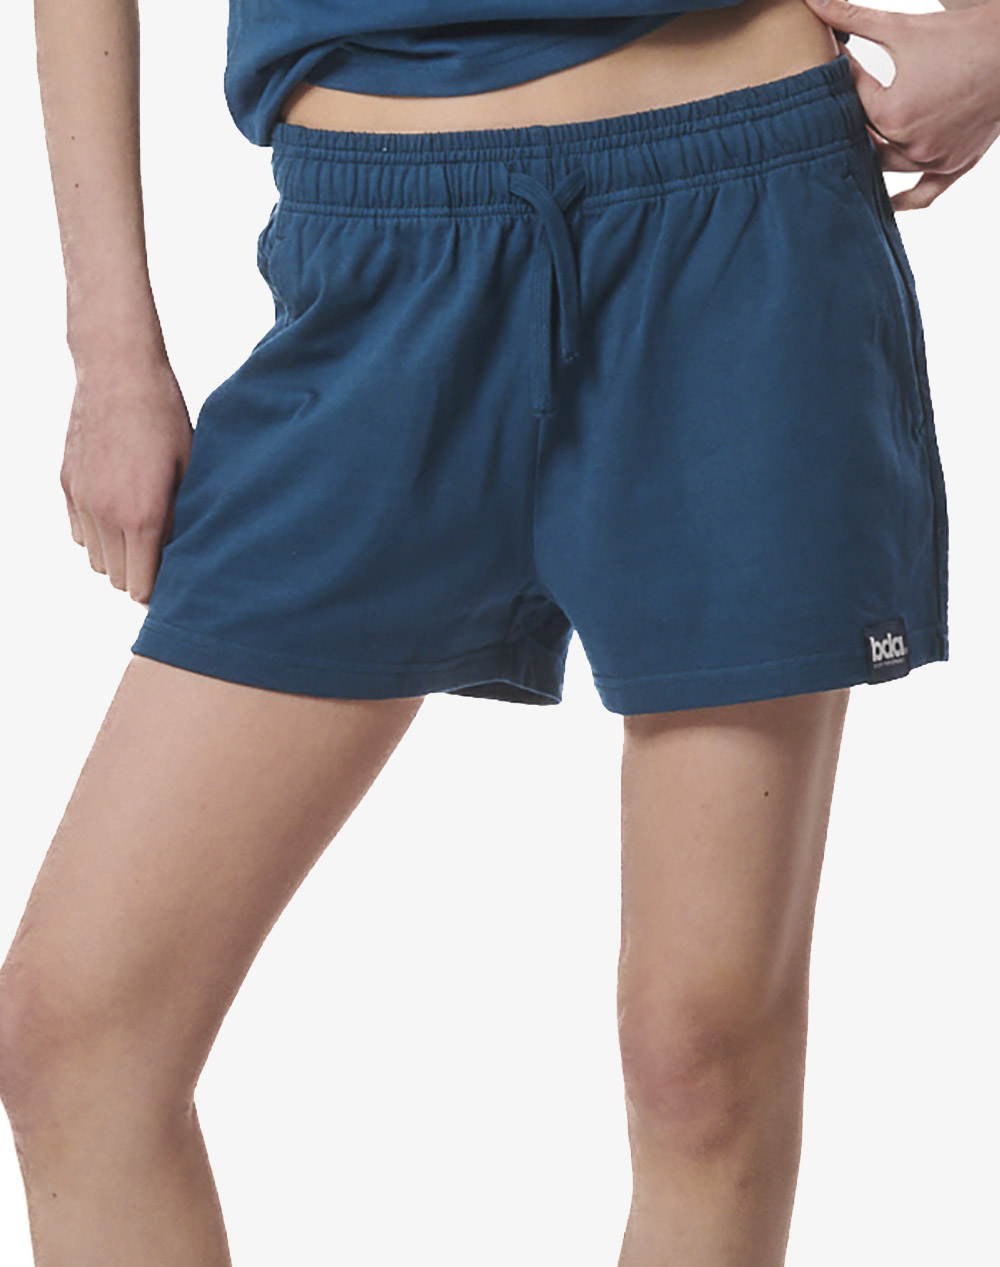 BODY ACTION WOMEN”S ESSENTIAL LOUNGE SHORTS 031426-01-COMBALT BLUE Blue 3810PBODY2400008_XR26854